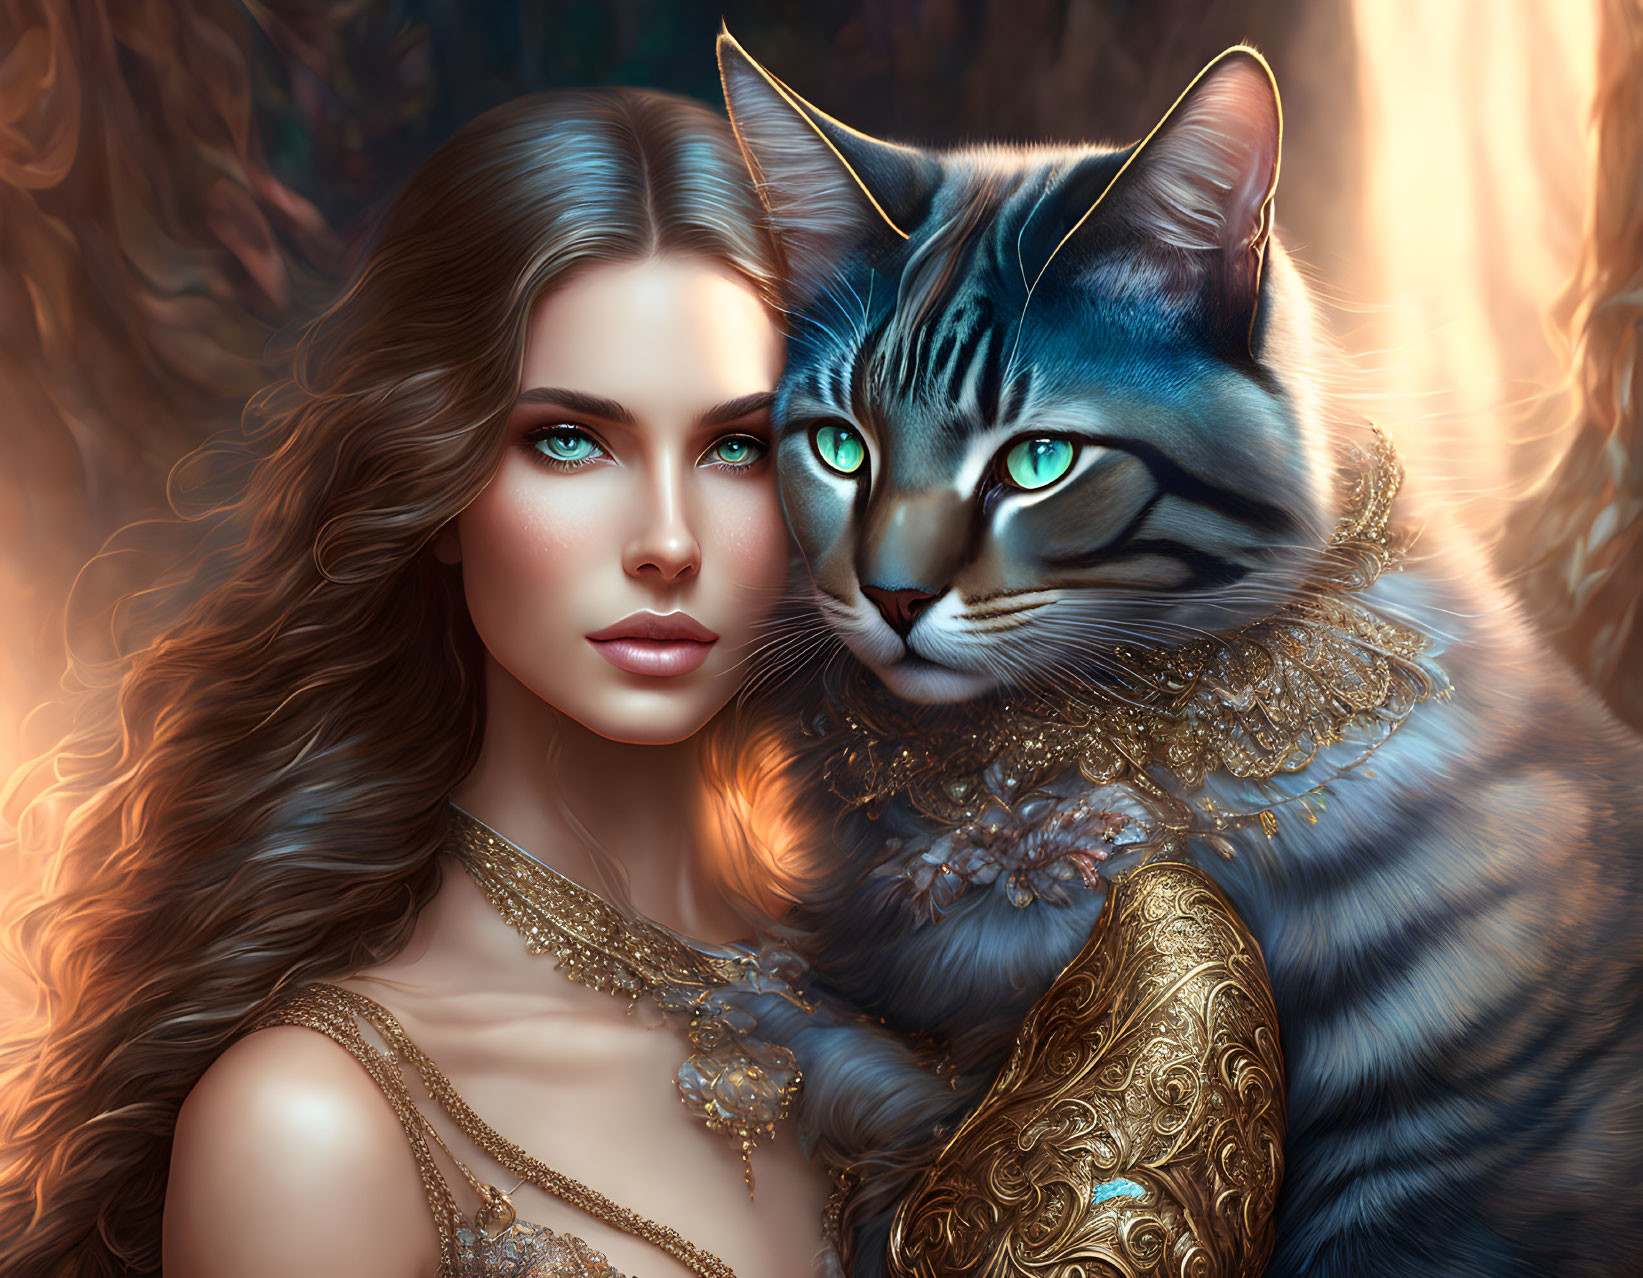 Long-haired woman in gold dress with realistic cat in regal attire